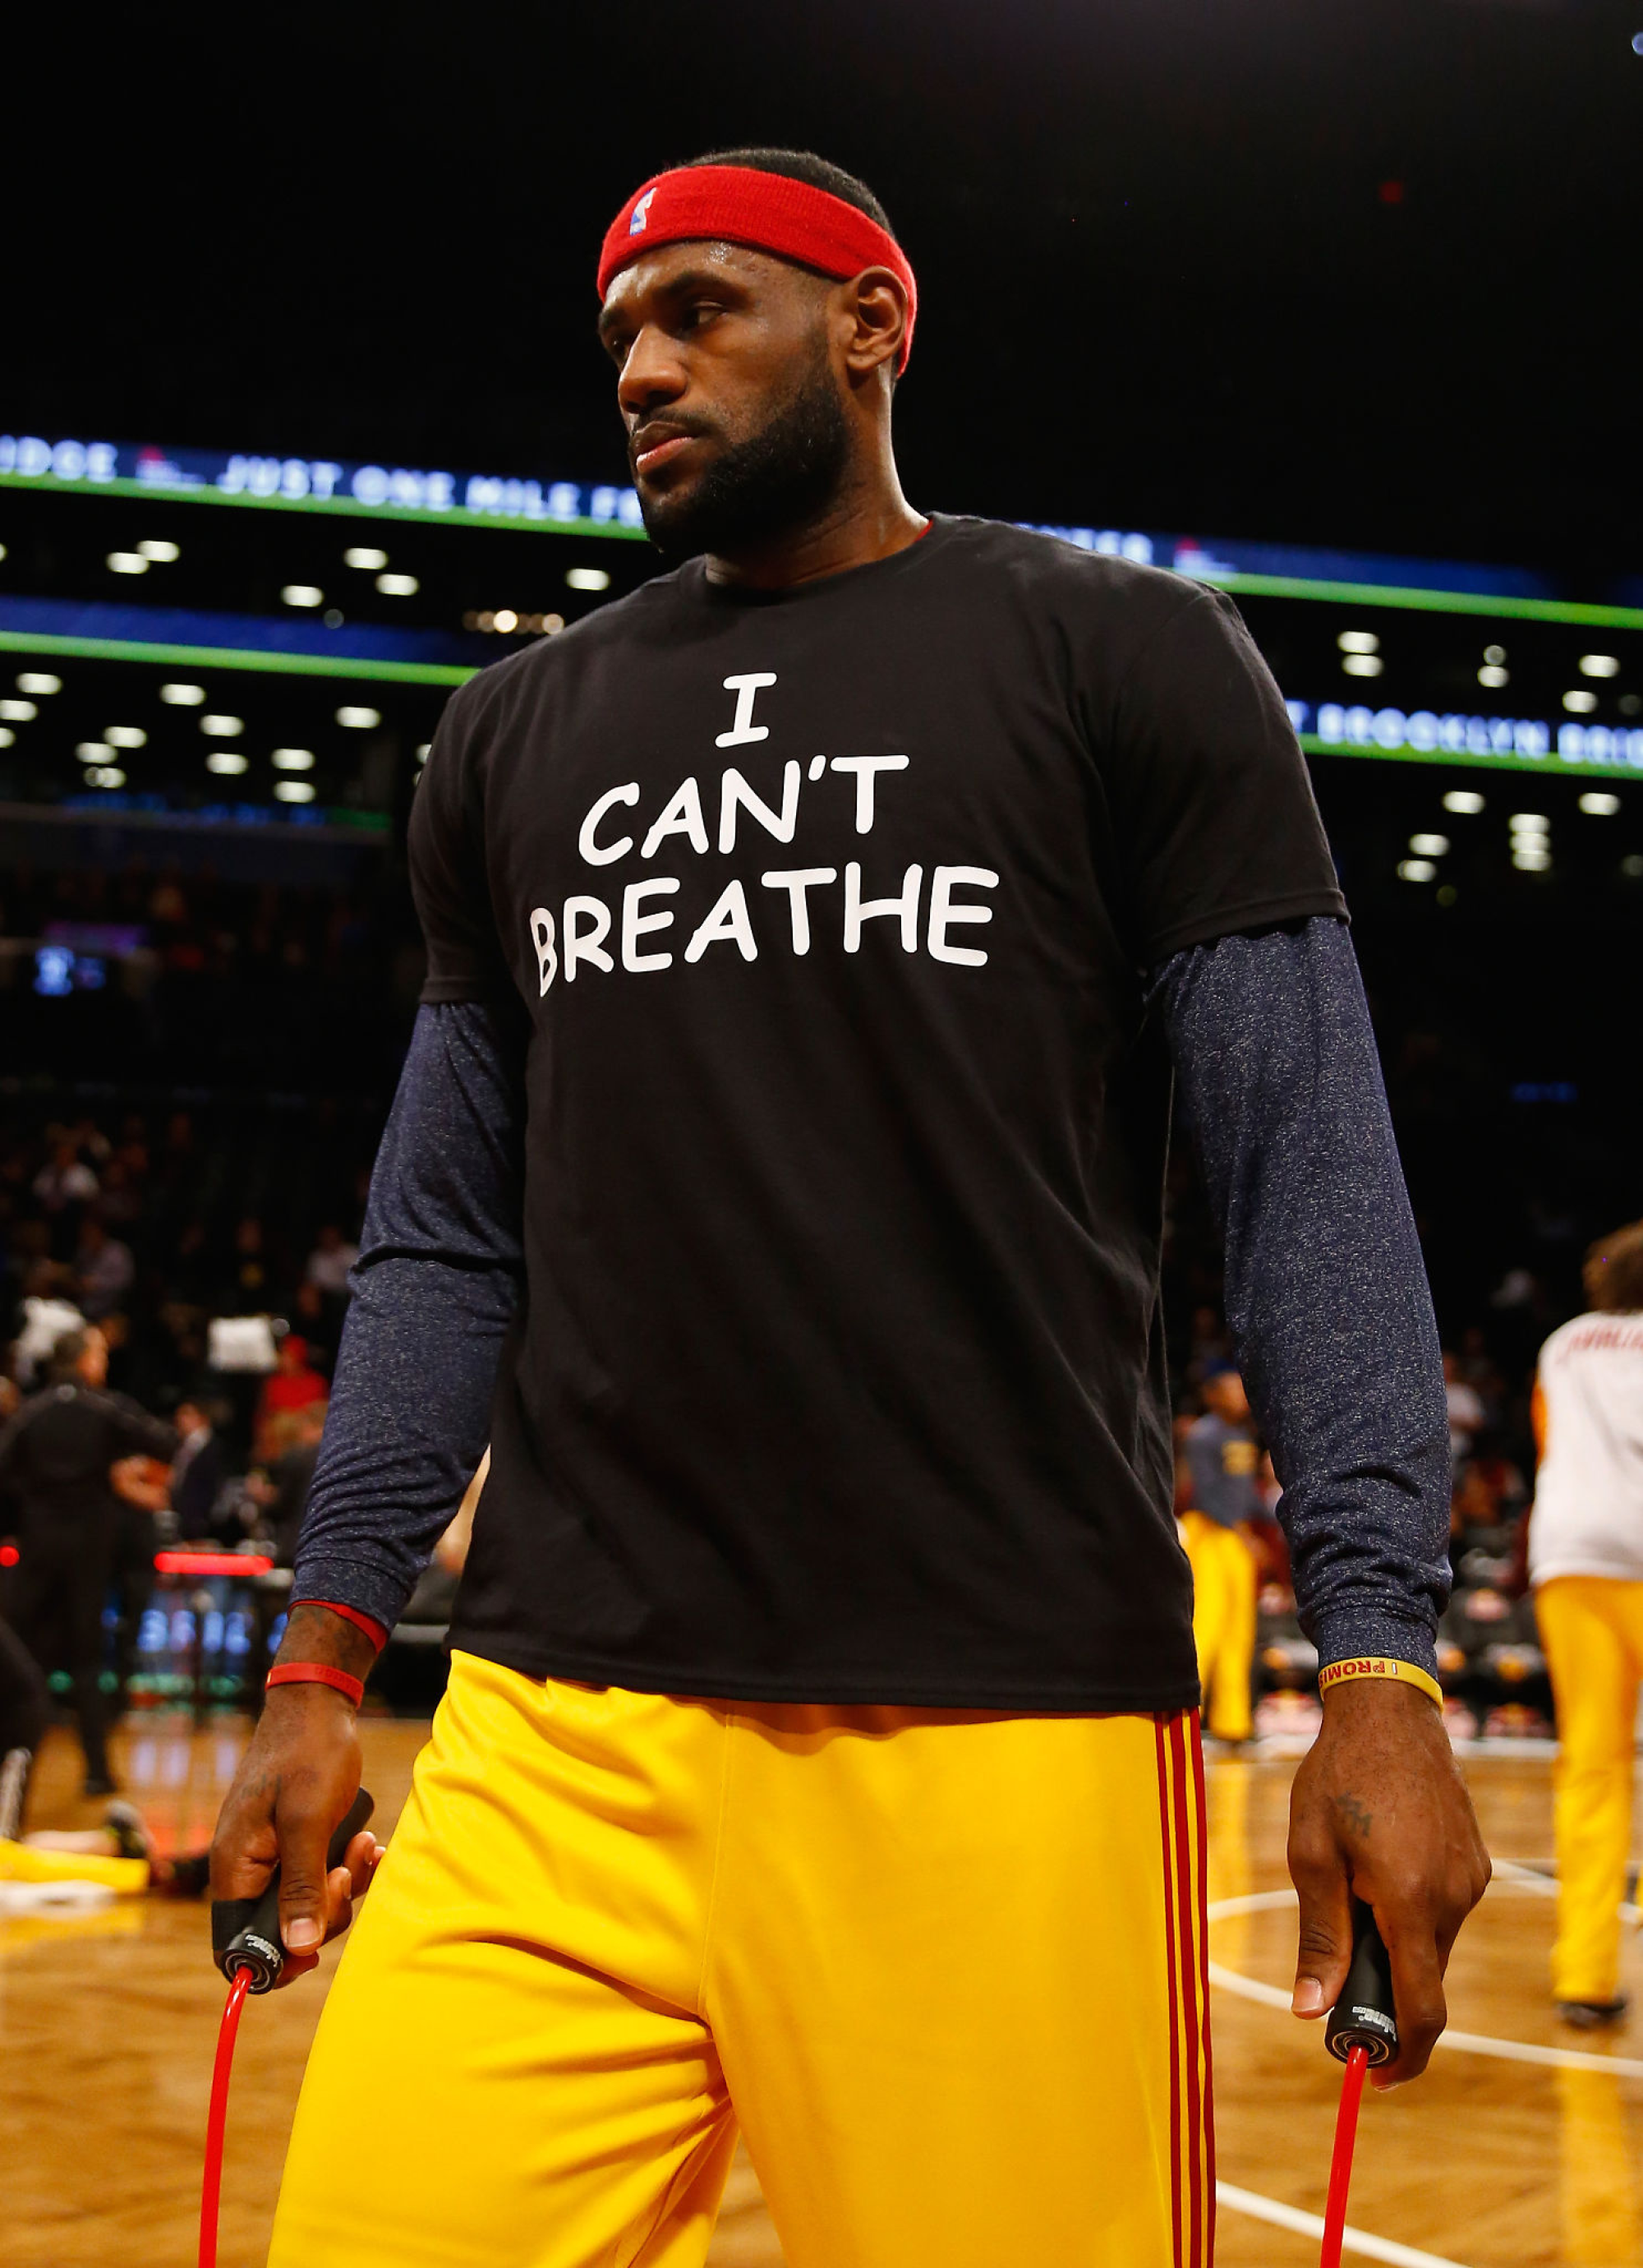 LeBron James, then with the Cleveland Cavaliers, wears an "I Can't Breathe" shirt during warmups 